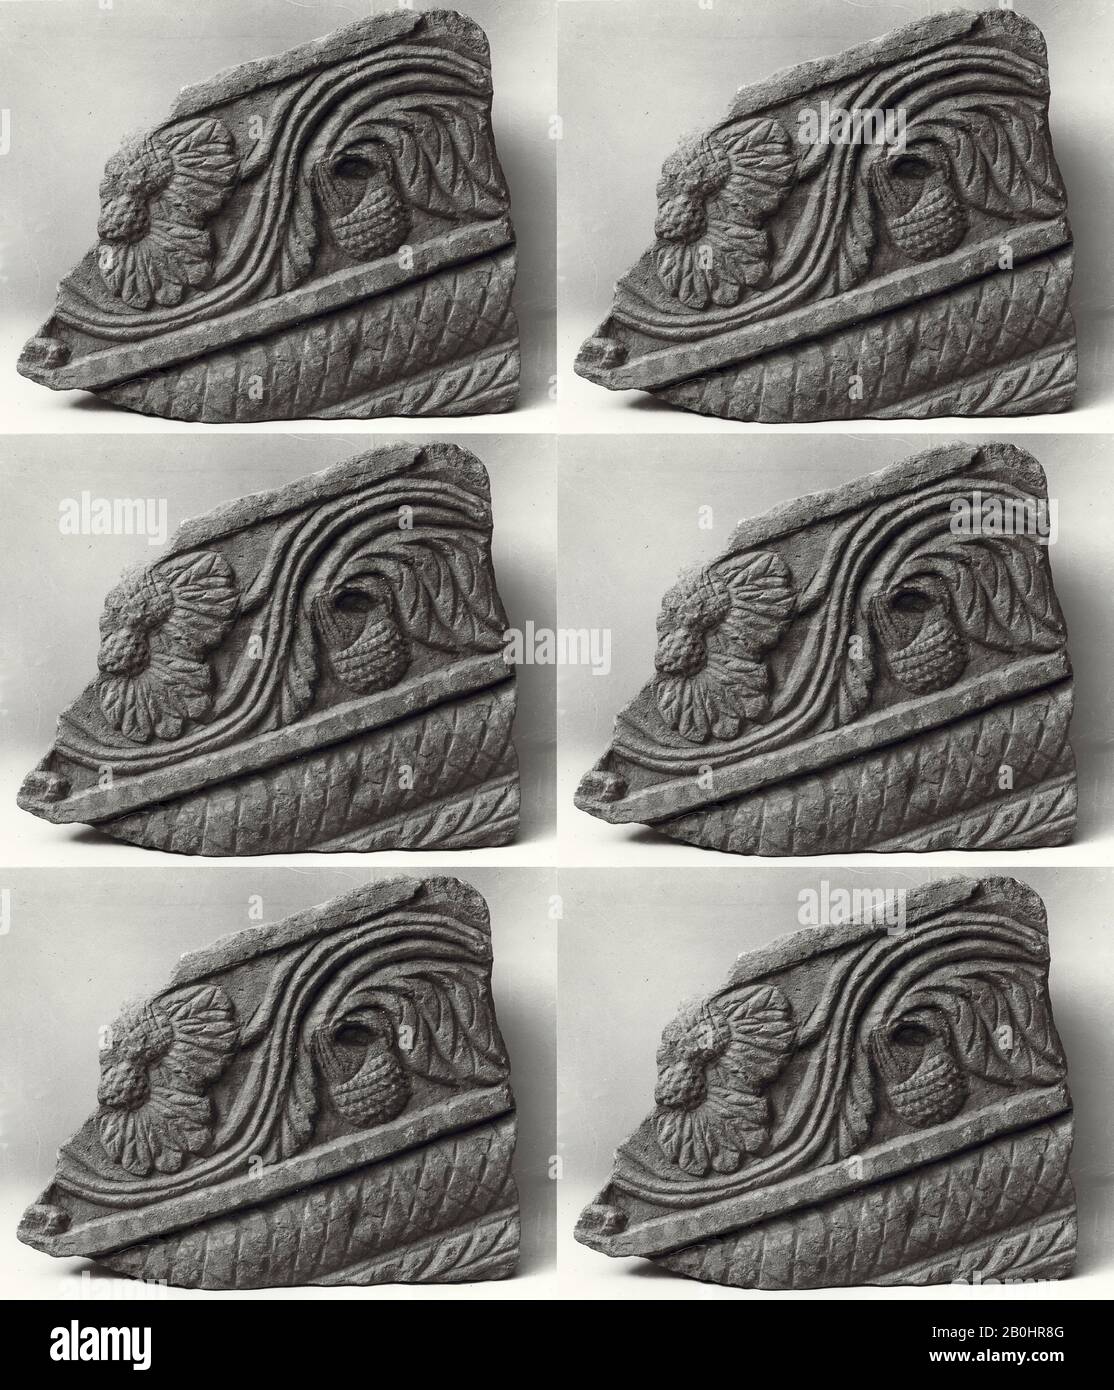 Ornamental Band, India, 1st–2nd century, India, Red sandstone, 10 x 7 1/4  in. (25.4 x 18.4 cm), Sculpture Stock Photo - Alamy